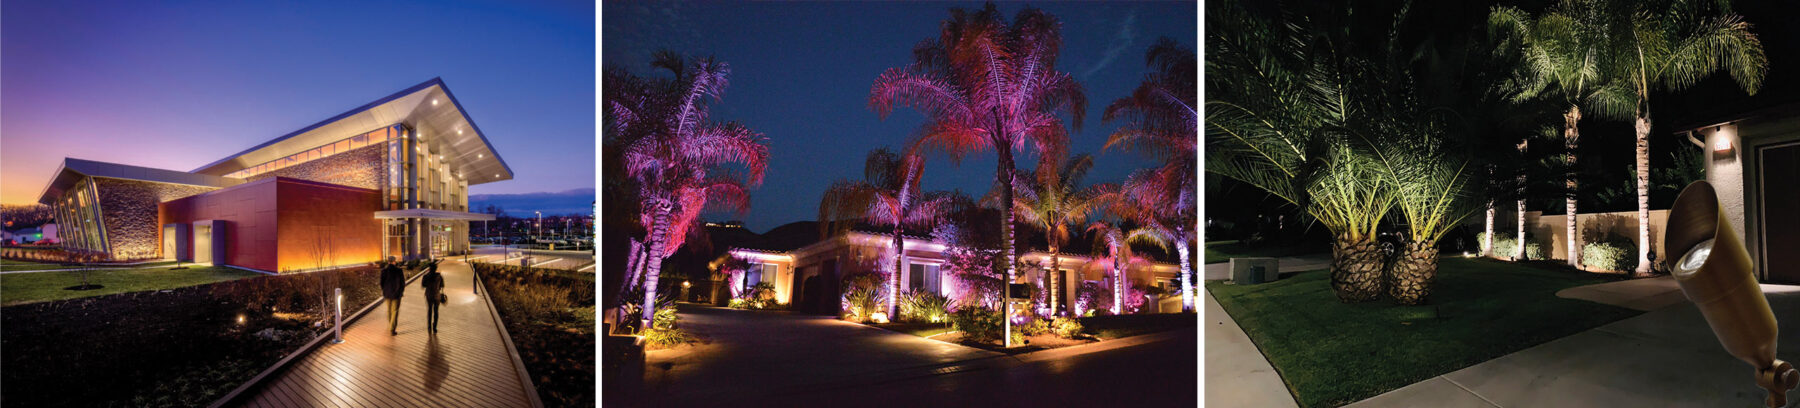 Beautiful Landscape Lighting Installation Pictures